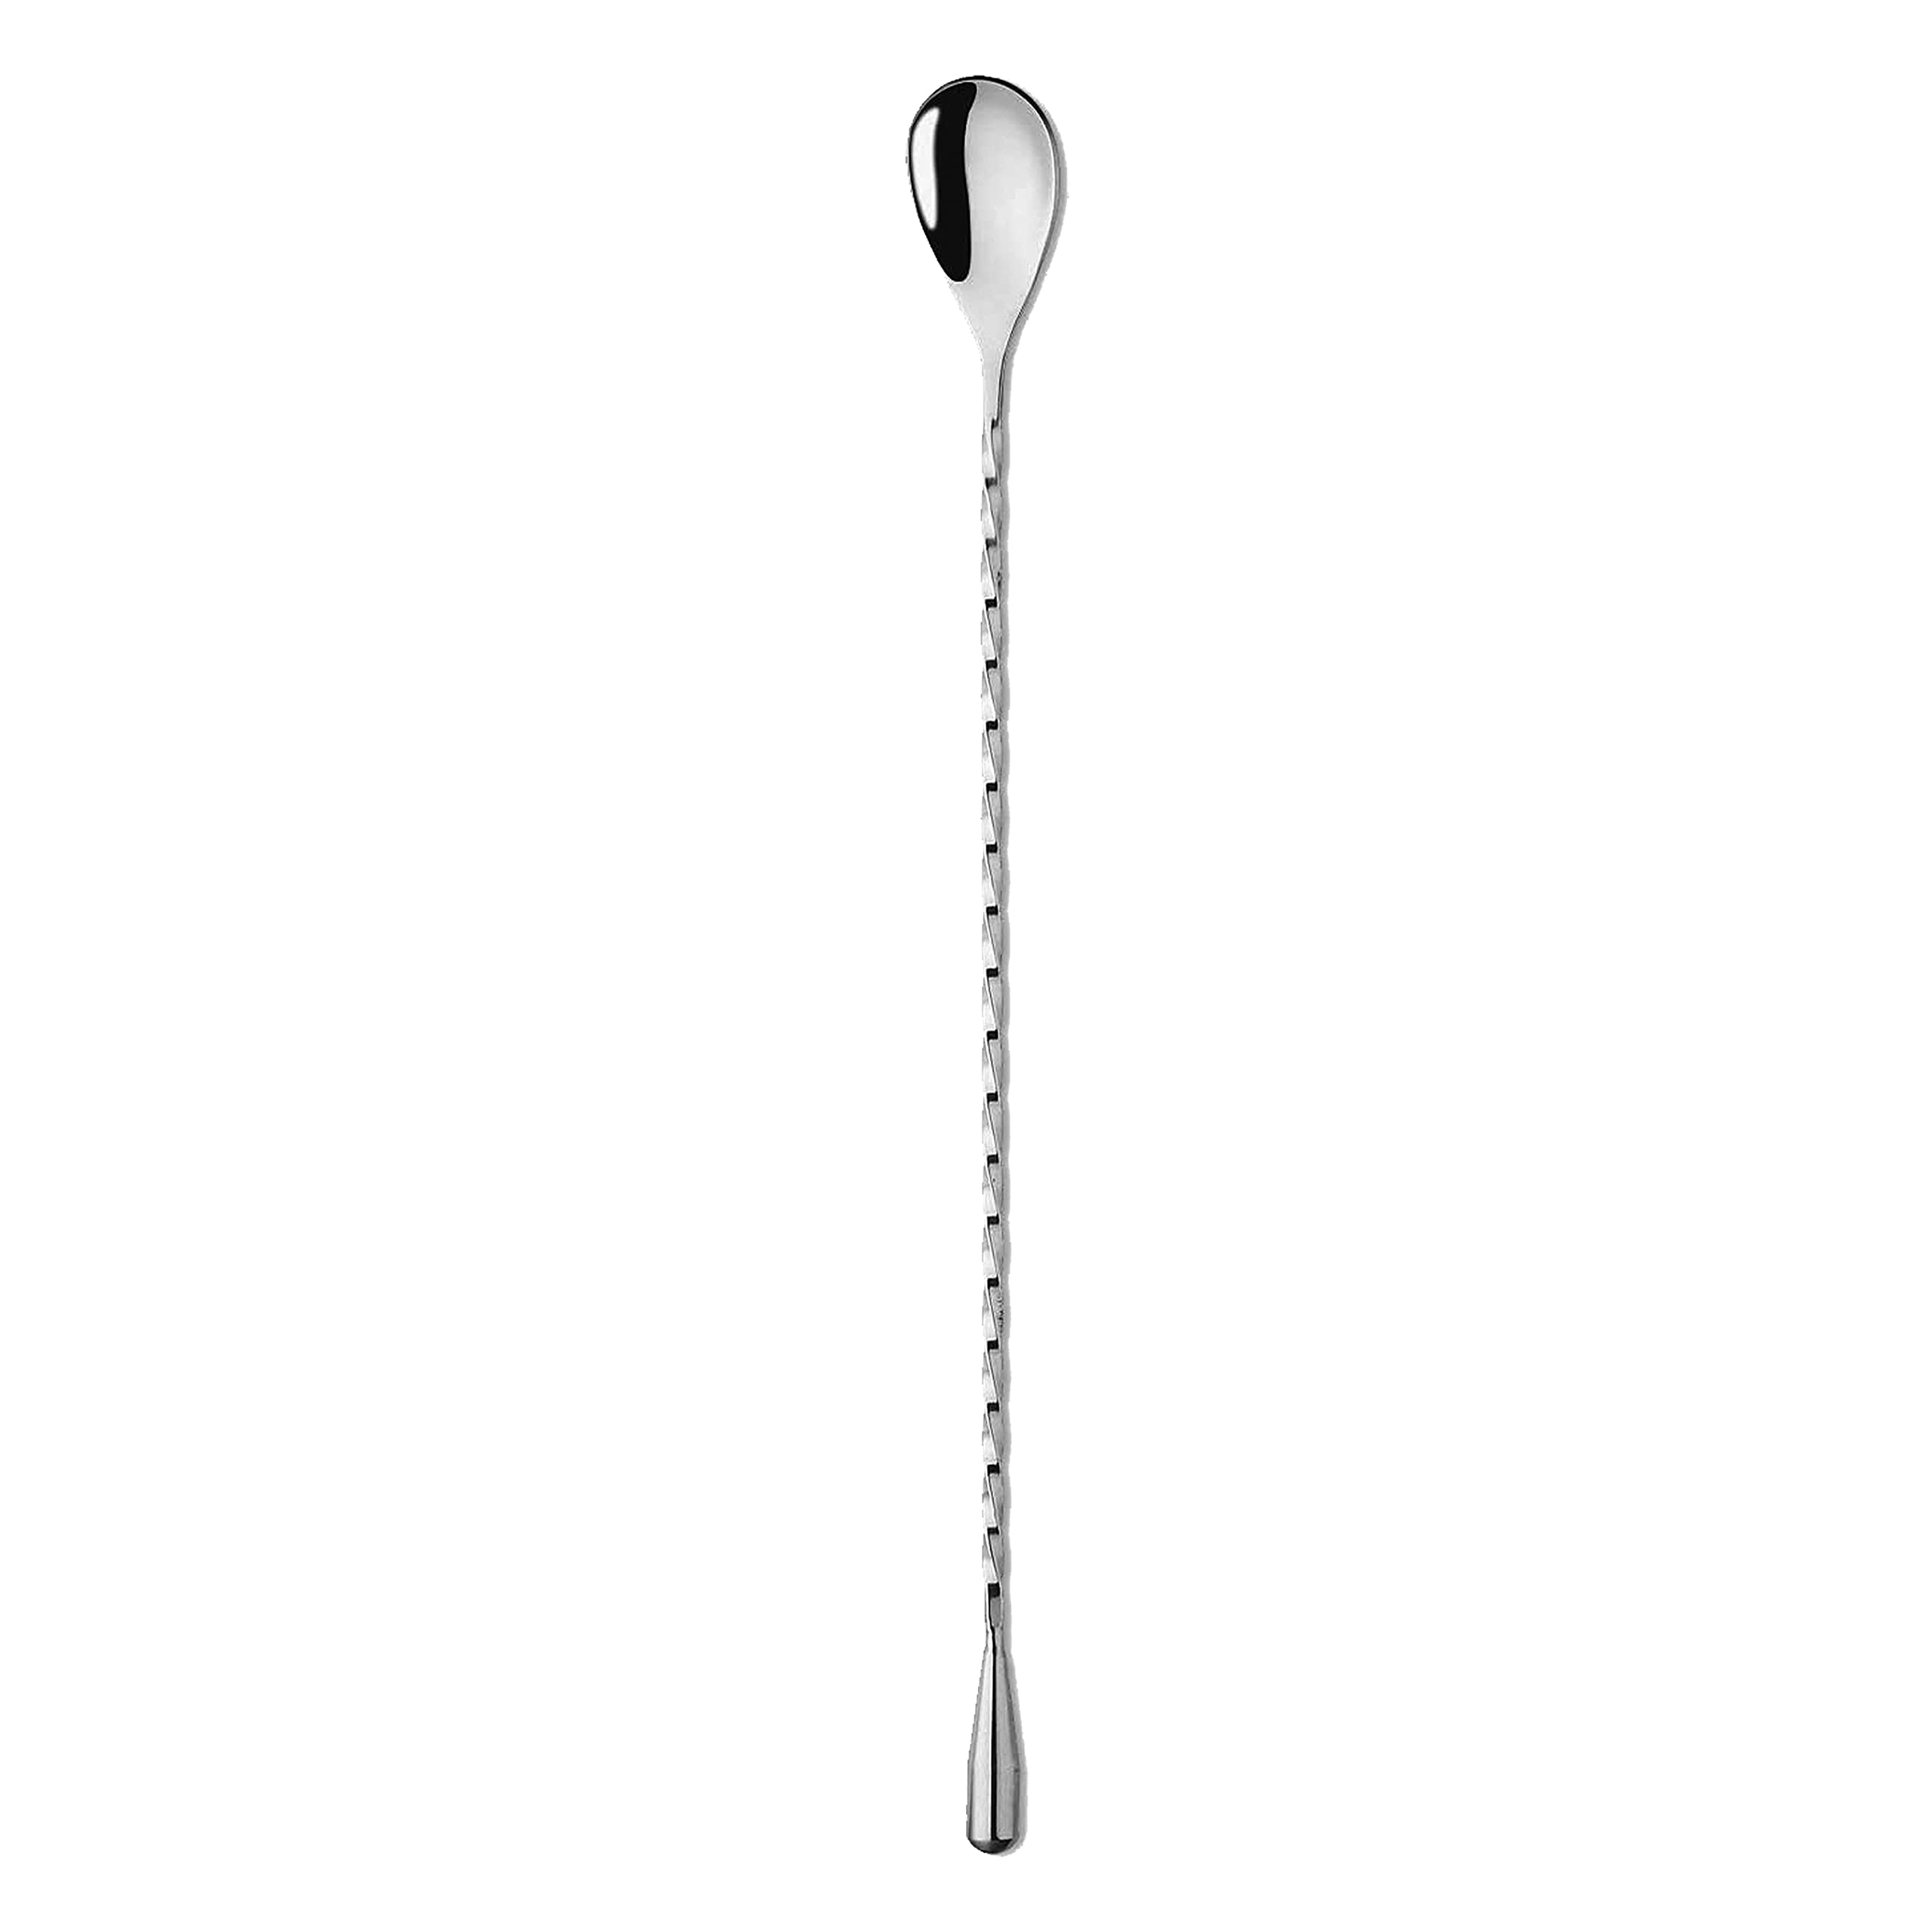 OGGI Spiral Handle Bar Spoon Cocktail Mixing Spoon - Elegant Bar Mixing Spoon with 13 inches / 33.5 cm Swivel Handle, Essential Mixology Bartender Kit, Old Fashioned Kit, Stainless Steel